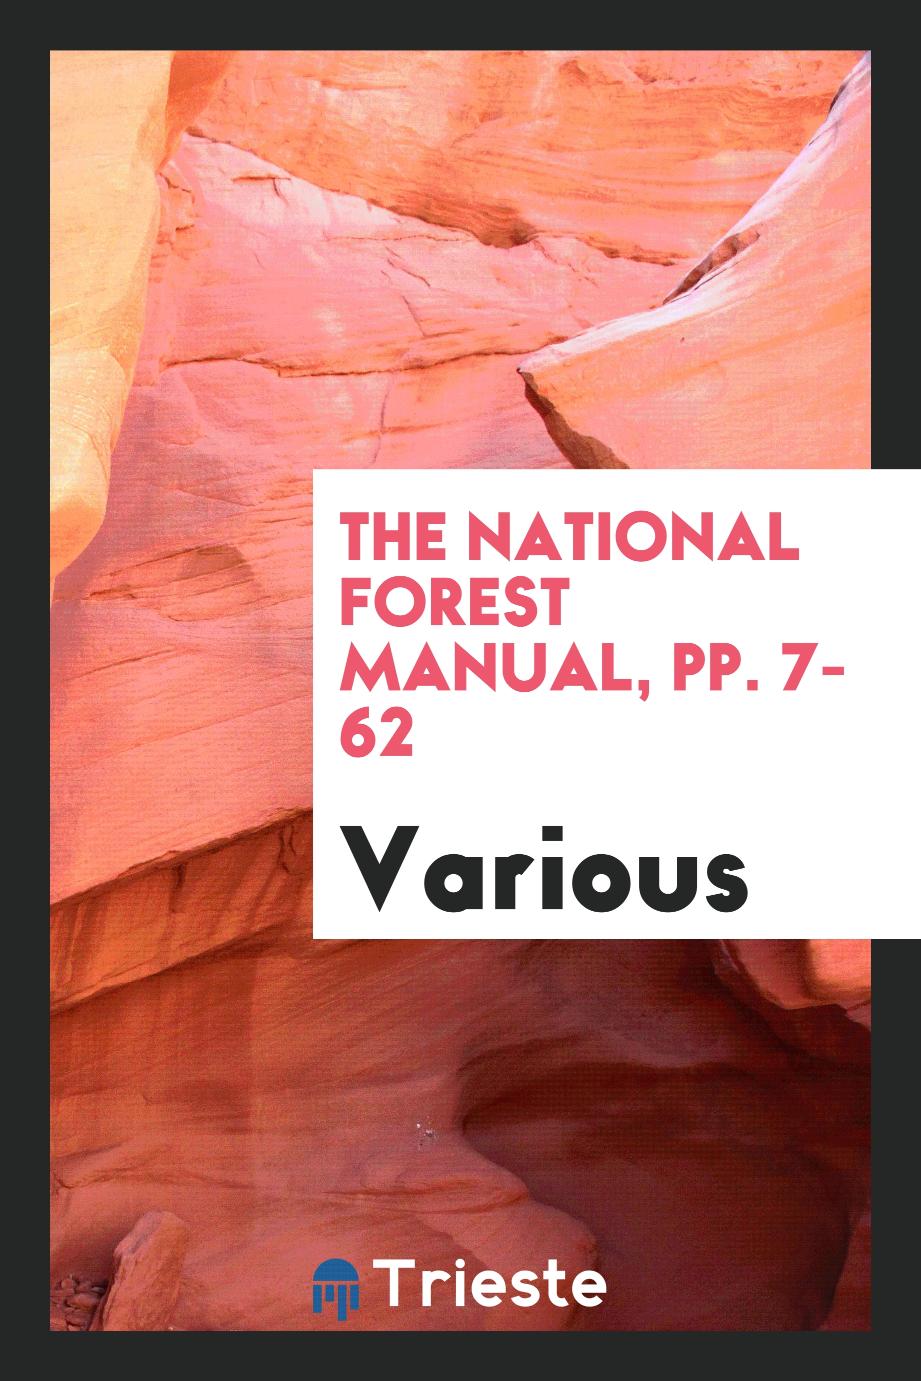 The national forest manual, pp. 7-62